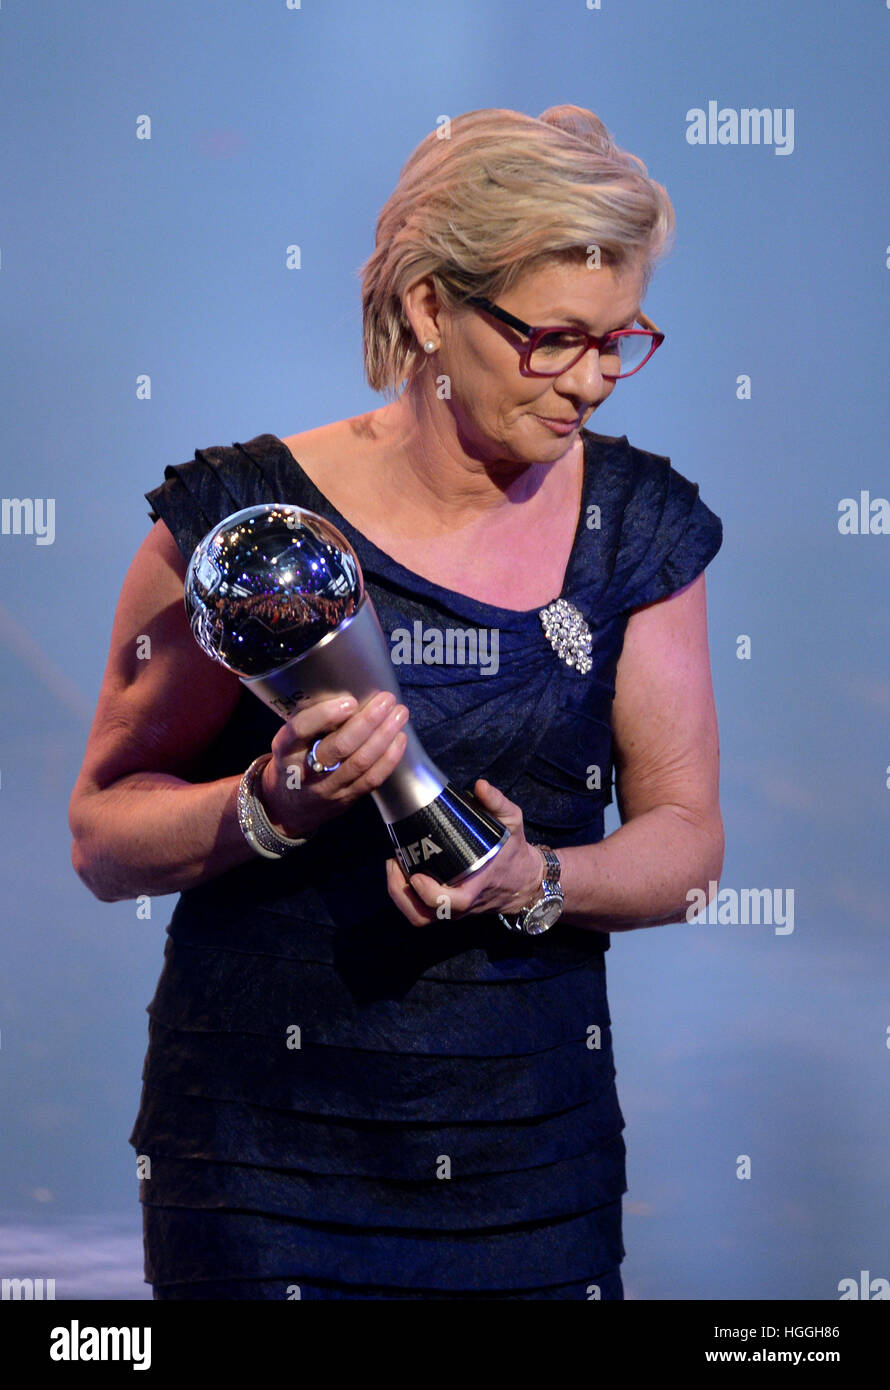 Zurich, Switzerland. 9th Jan, 2017. Silvia Neid, former coach of the German national soccer team, receives her trophy as Best FIFA Women's Coach at the FIFA World Player of the Year 2016 gala event in Zurich, Switzerland, 9 January 2017. Former Brazilian soccer player Ronaldo can be seen on the right. Photo: Patrick Seeger/dpa/Alamy Live News Stock Photo